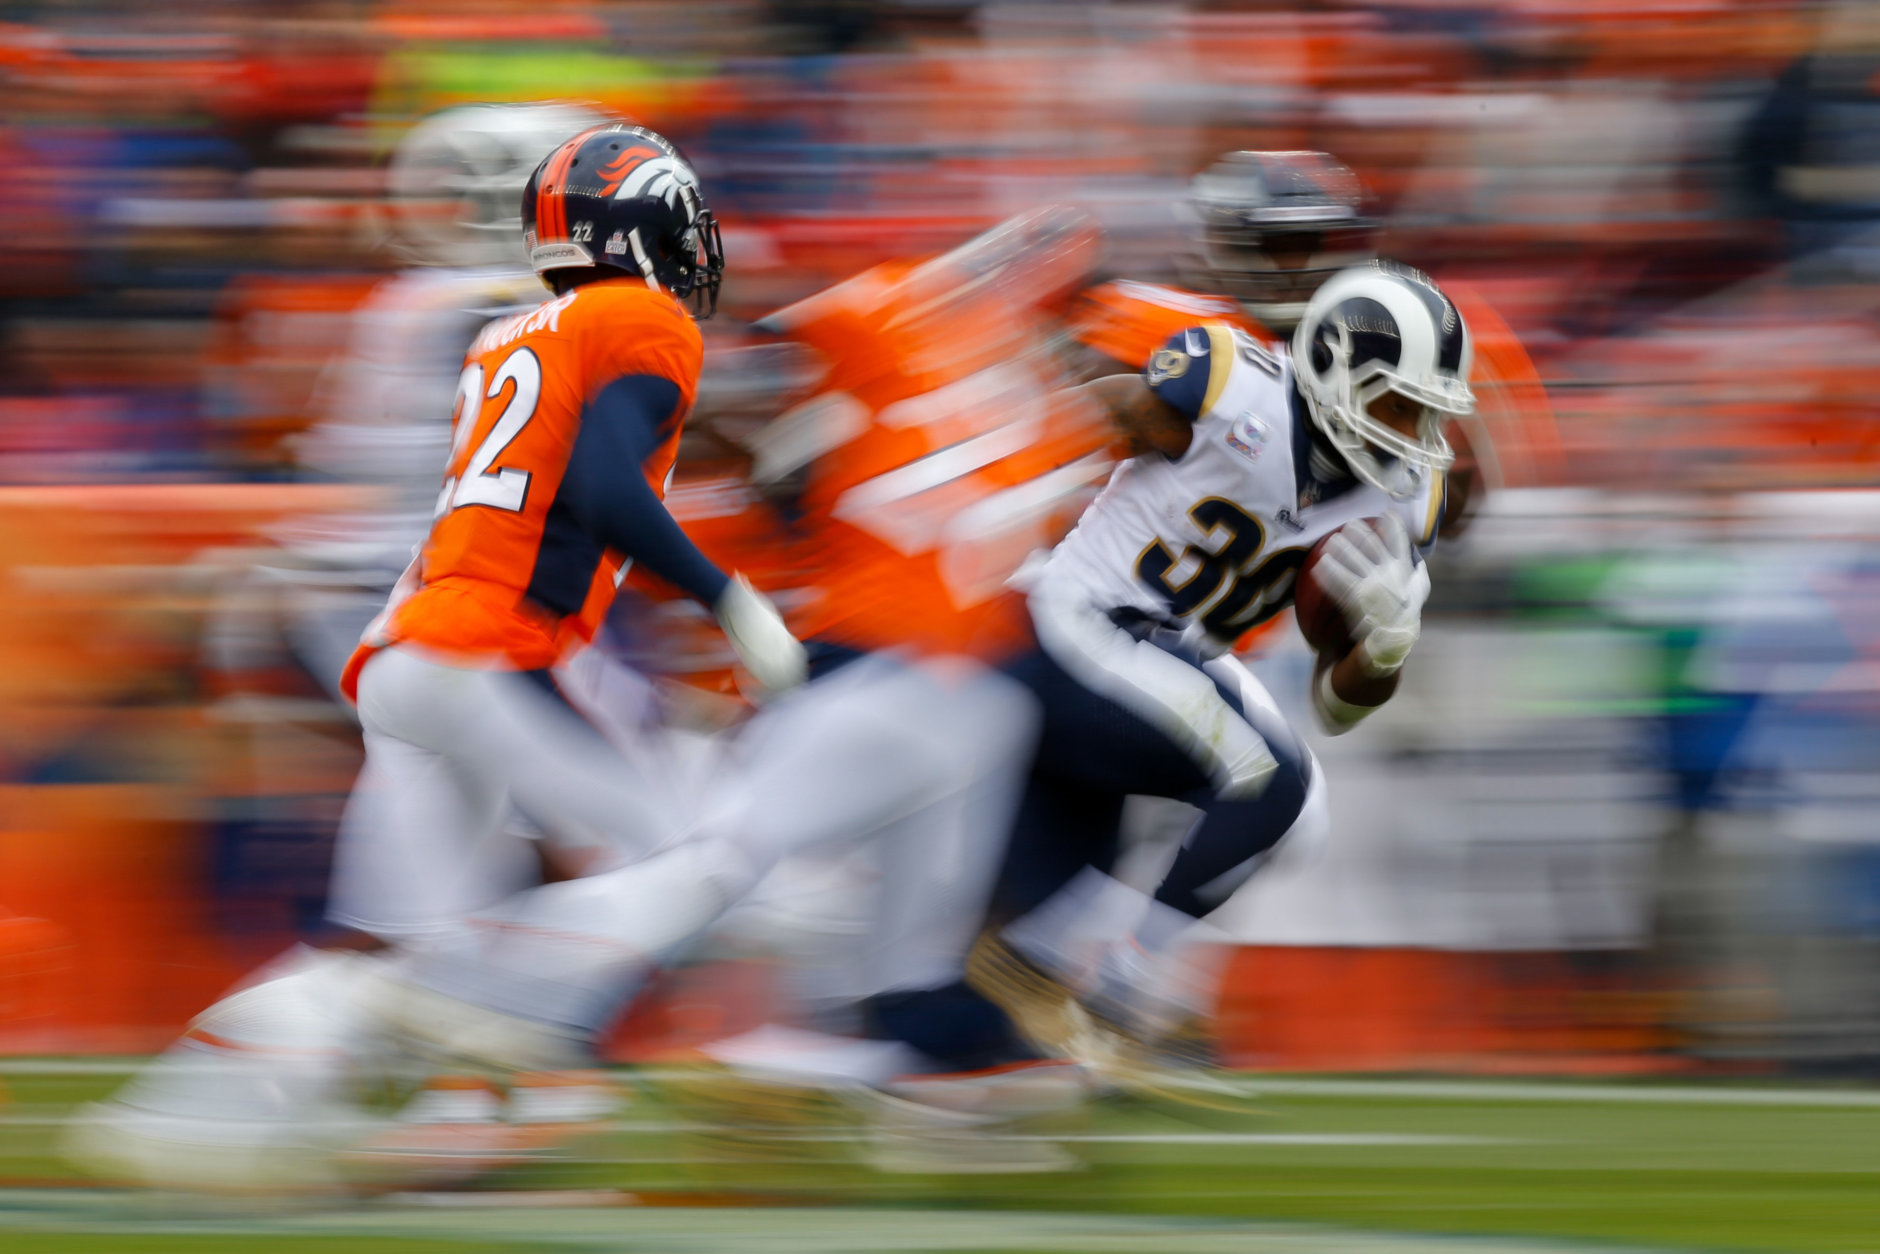 DENVER, CO - OCTOBER 14:  Running back Todd Gurley II #30 of the Los Angeles Rams runs with the football while being chased by cornerback Tramaine Brock #22 of the Denver Broncos during the second quarter at Broncos Stadium at Mile High on October 14, 2018 in Denver, Colorado. (Photo by Justin Edmonds/Getty Images)